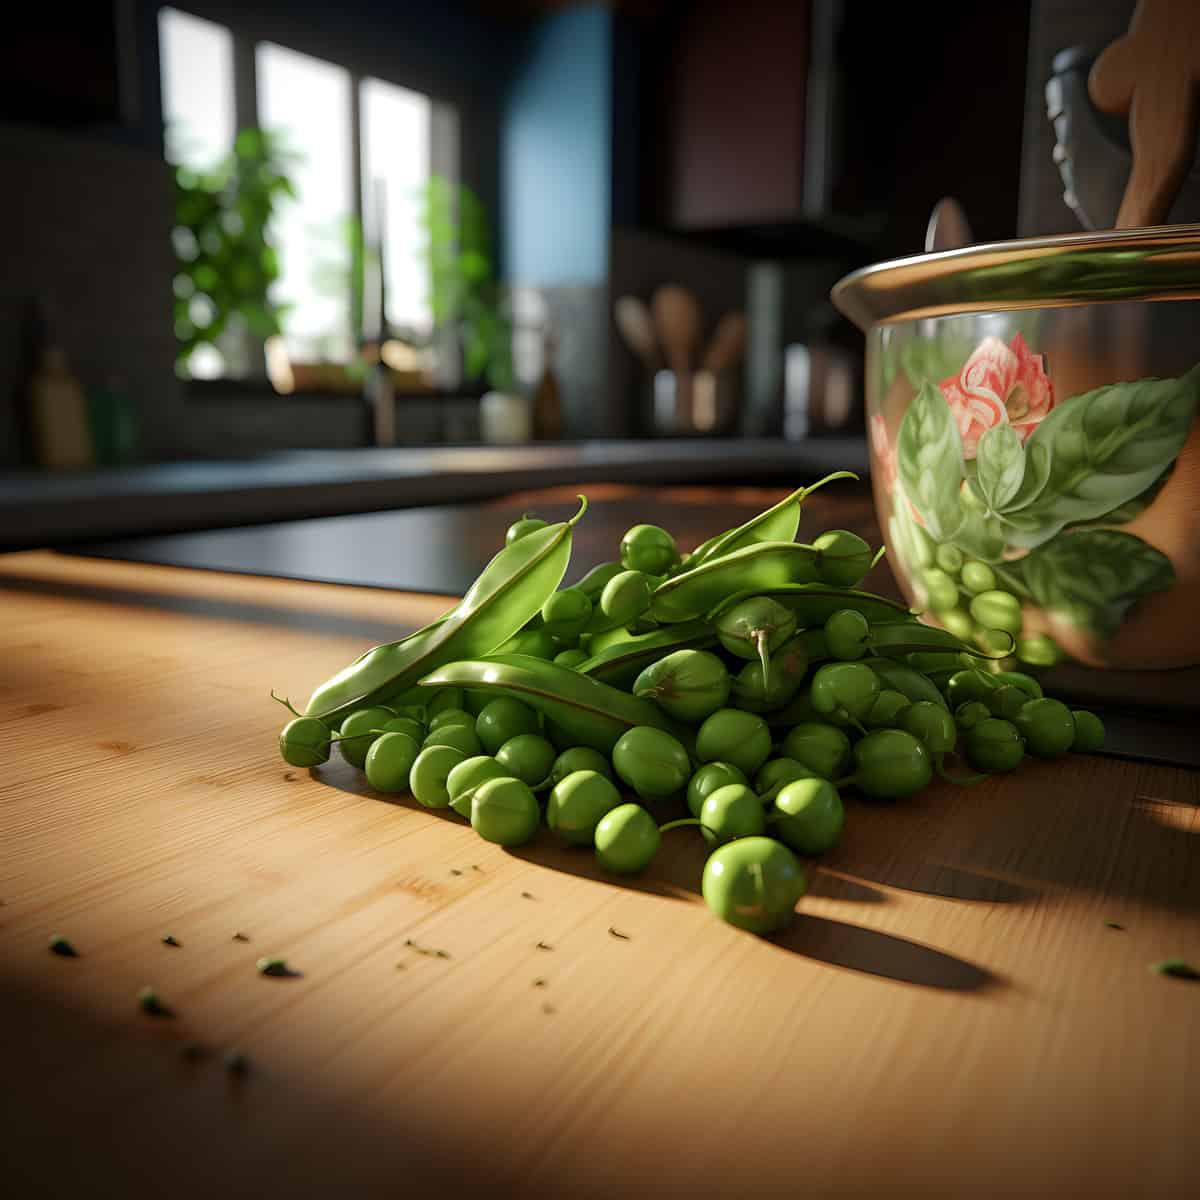 Earth Peas on a kitchen counter